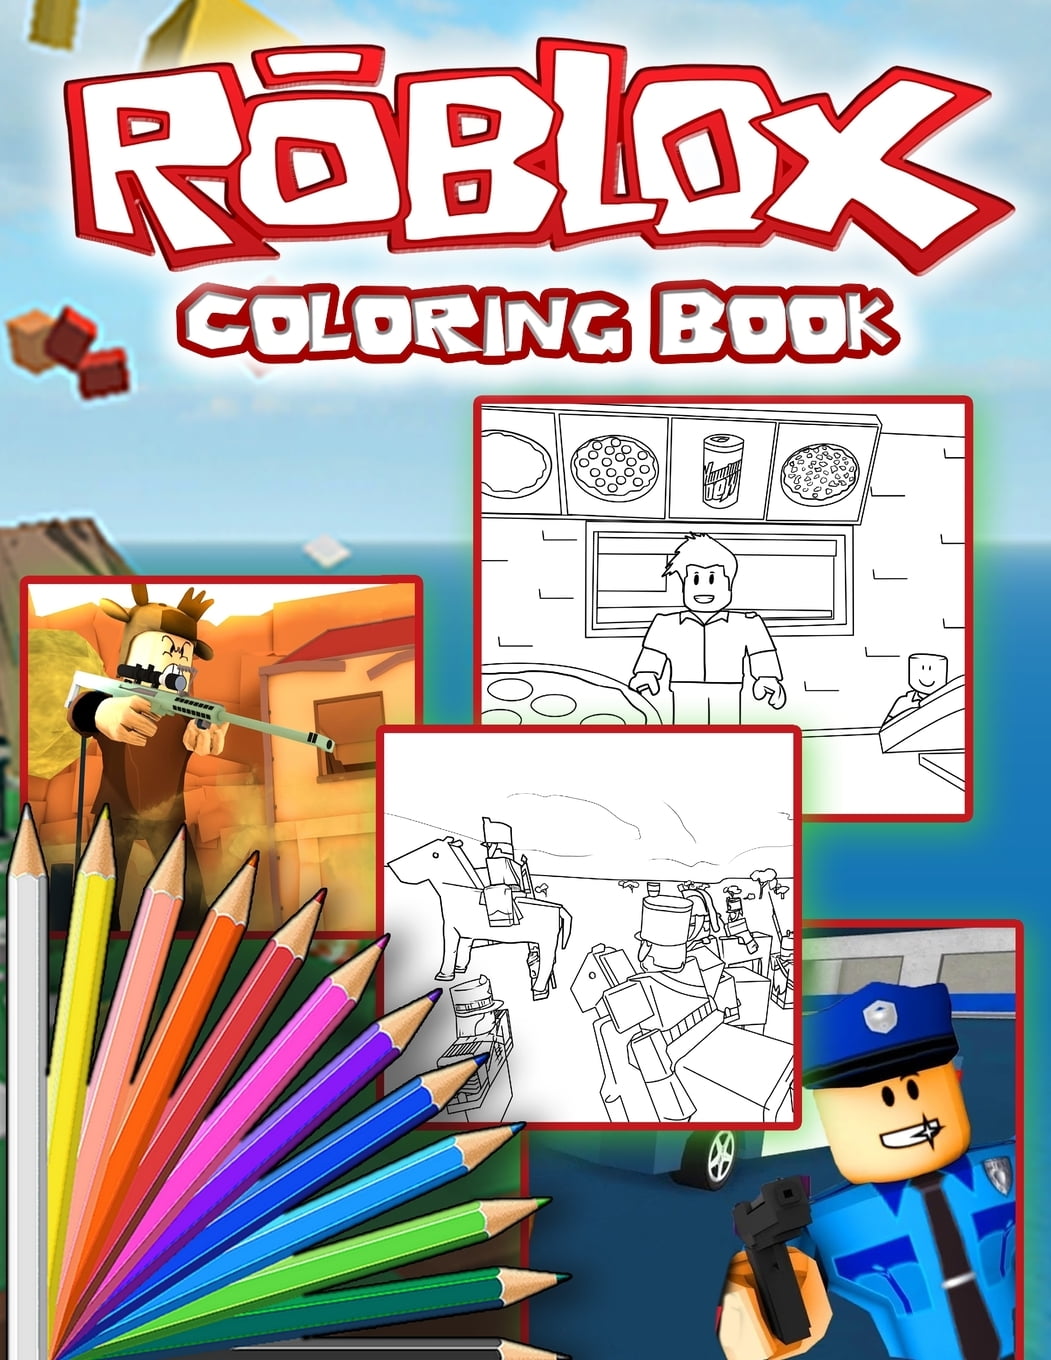 Roblox Coloring Book For Kids Ages 3-5: Great Gift for Boys